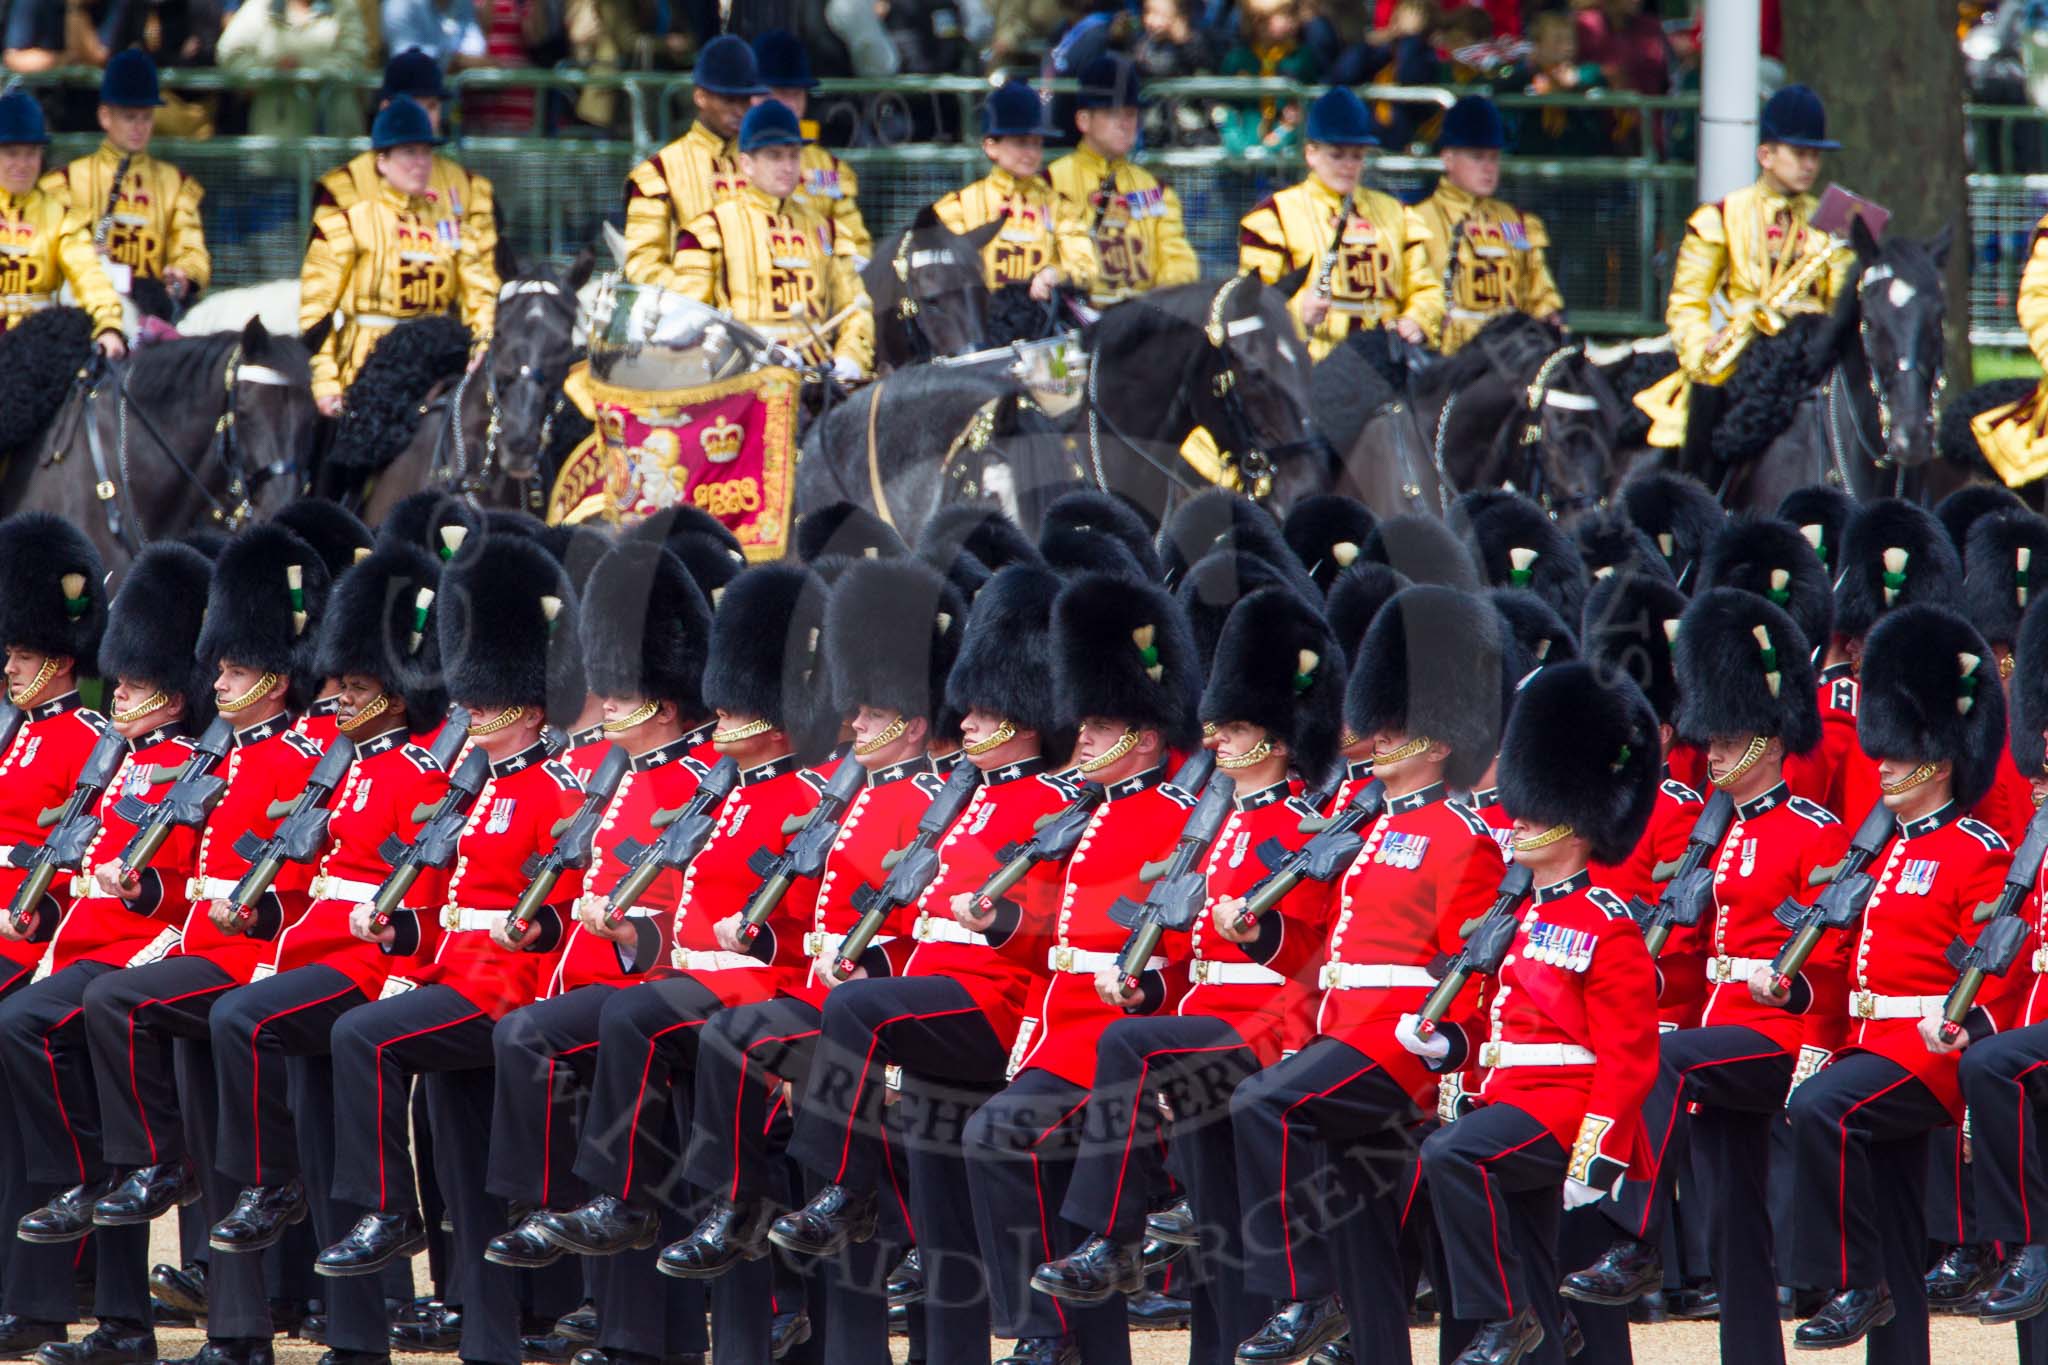 The Colonel's Review 2013: Welsh Guards as they change pace from slow march to quick march..
Horse Guards Parade, Westminster,
London SW1,

United Kingdom,
on 08 June 2013 at 11:39, image #671